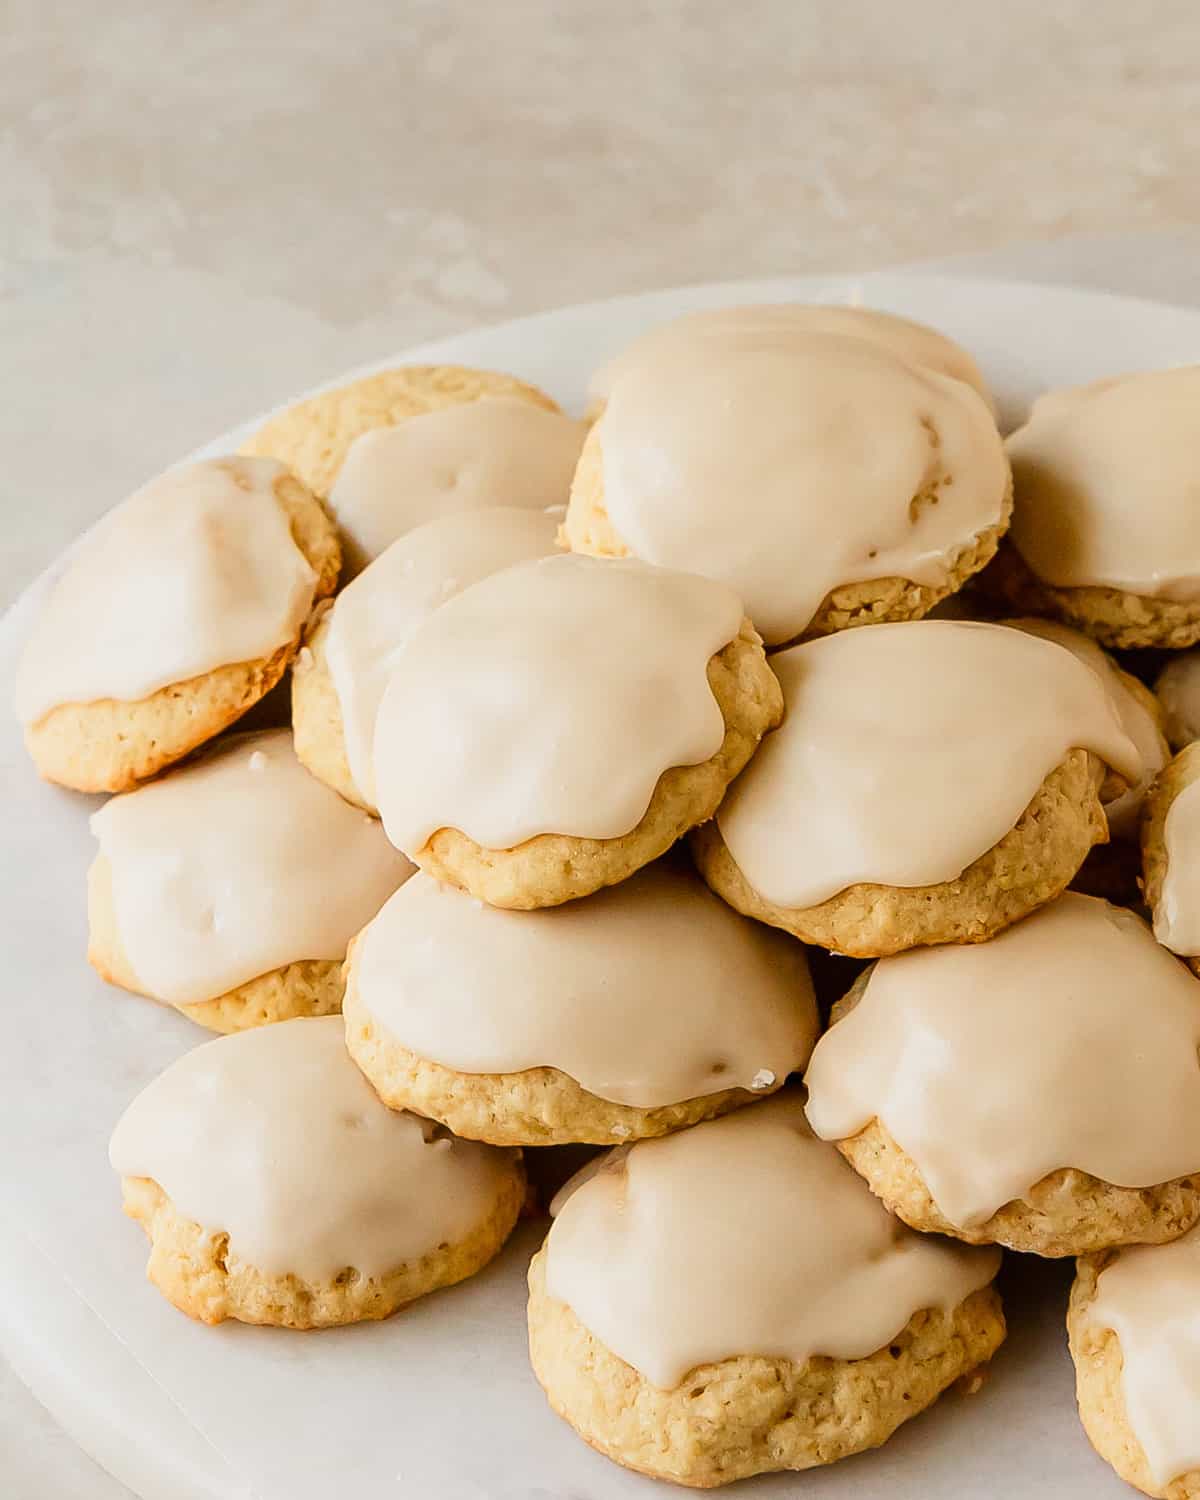 Buttermilk cookies are soft vanilla cookies with a tender, cakey crumb. Also known as Amish cookies, these buttermilk sugar cookies are topped with a sweet and slightly tangy buttermilk glaze.  Since these cookies with buttermilk are quick and easy to make, they are the perfect easy treat when you are craving something a sweet and a little old fashioned.